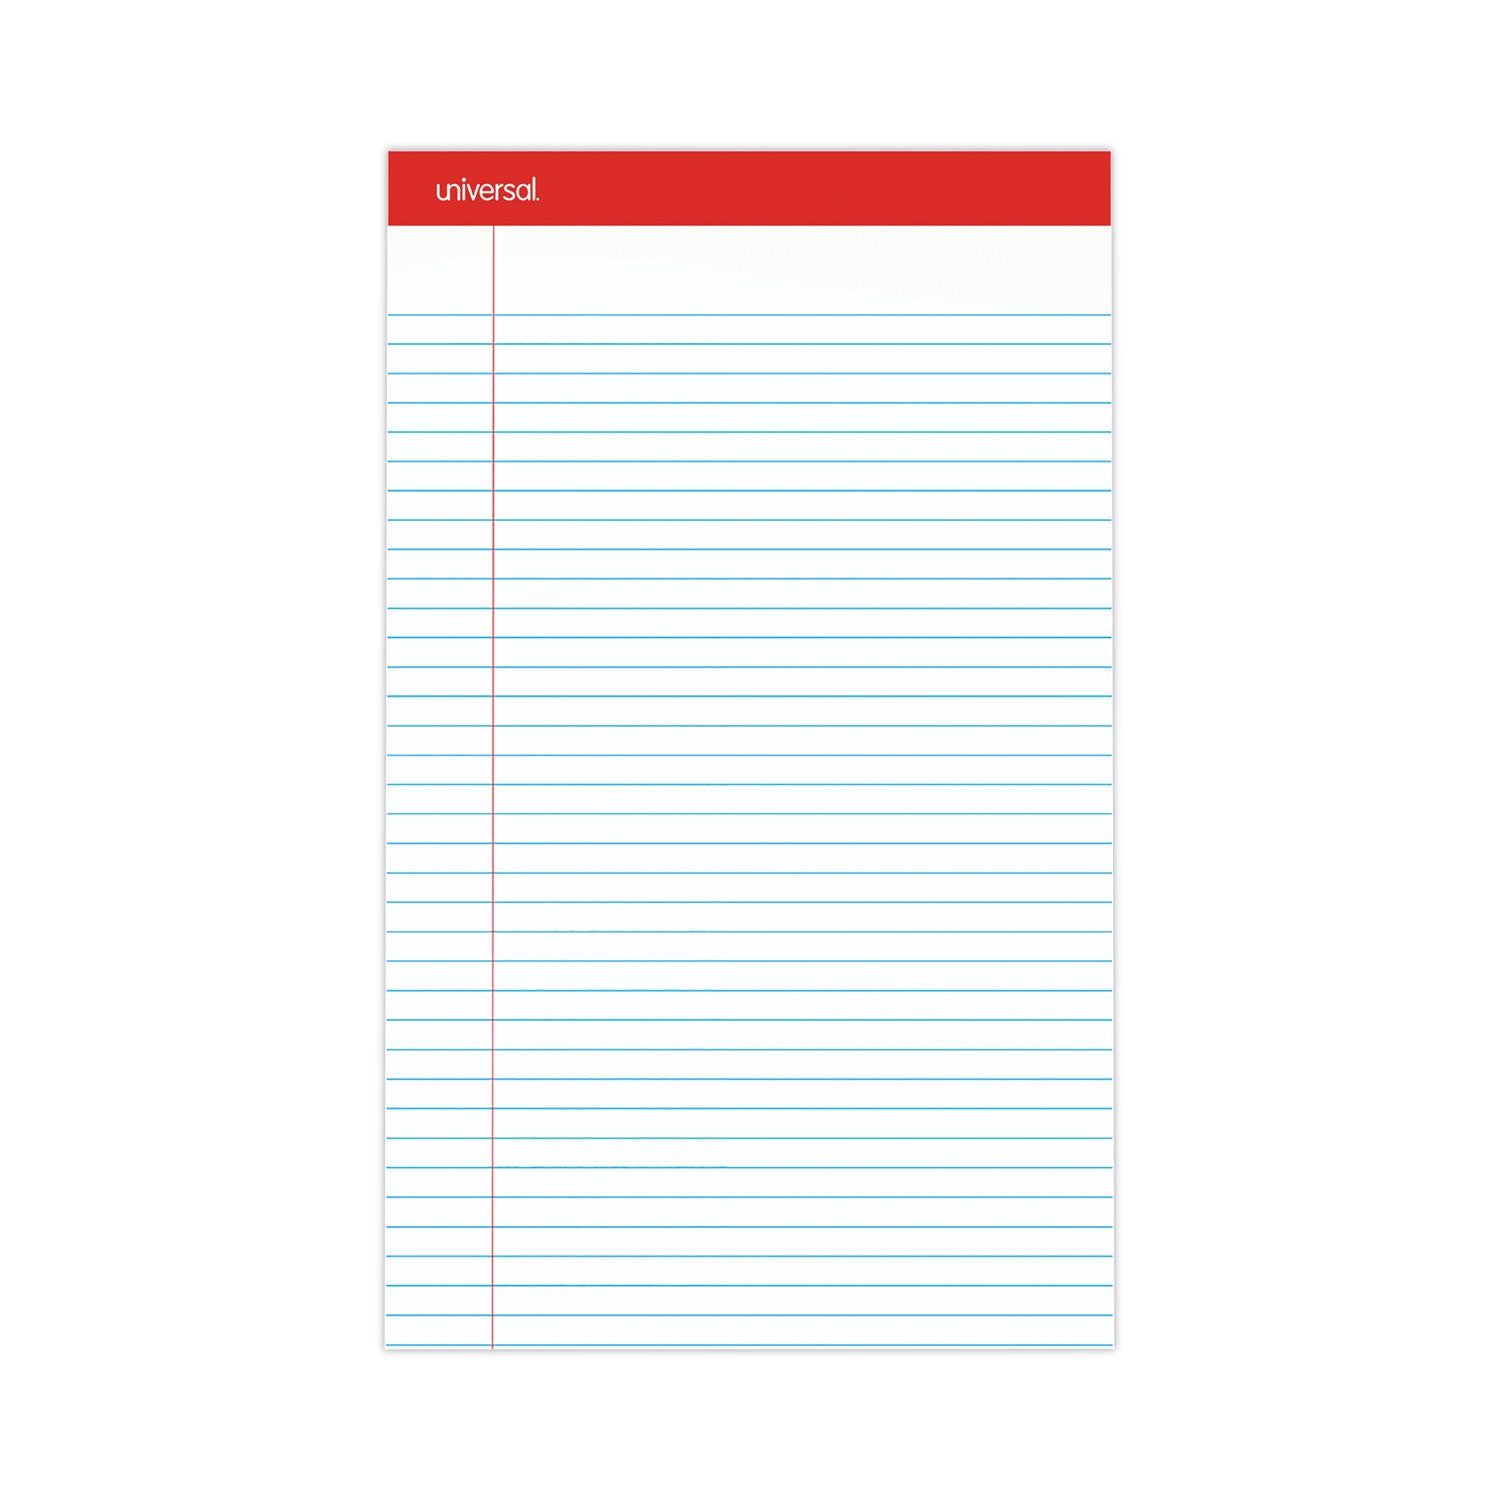 Perforated Ruled Writing Pads, Wide/Legal Rule, Red Headband, 50 White 8.5 x 14 Sheets, Dozen - 